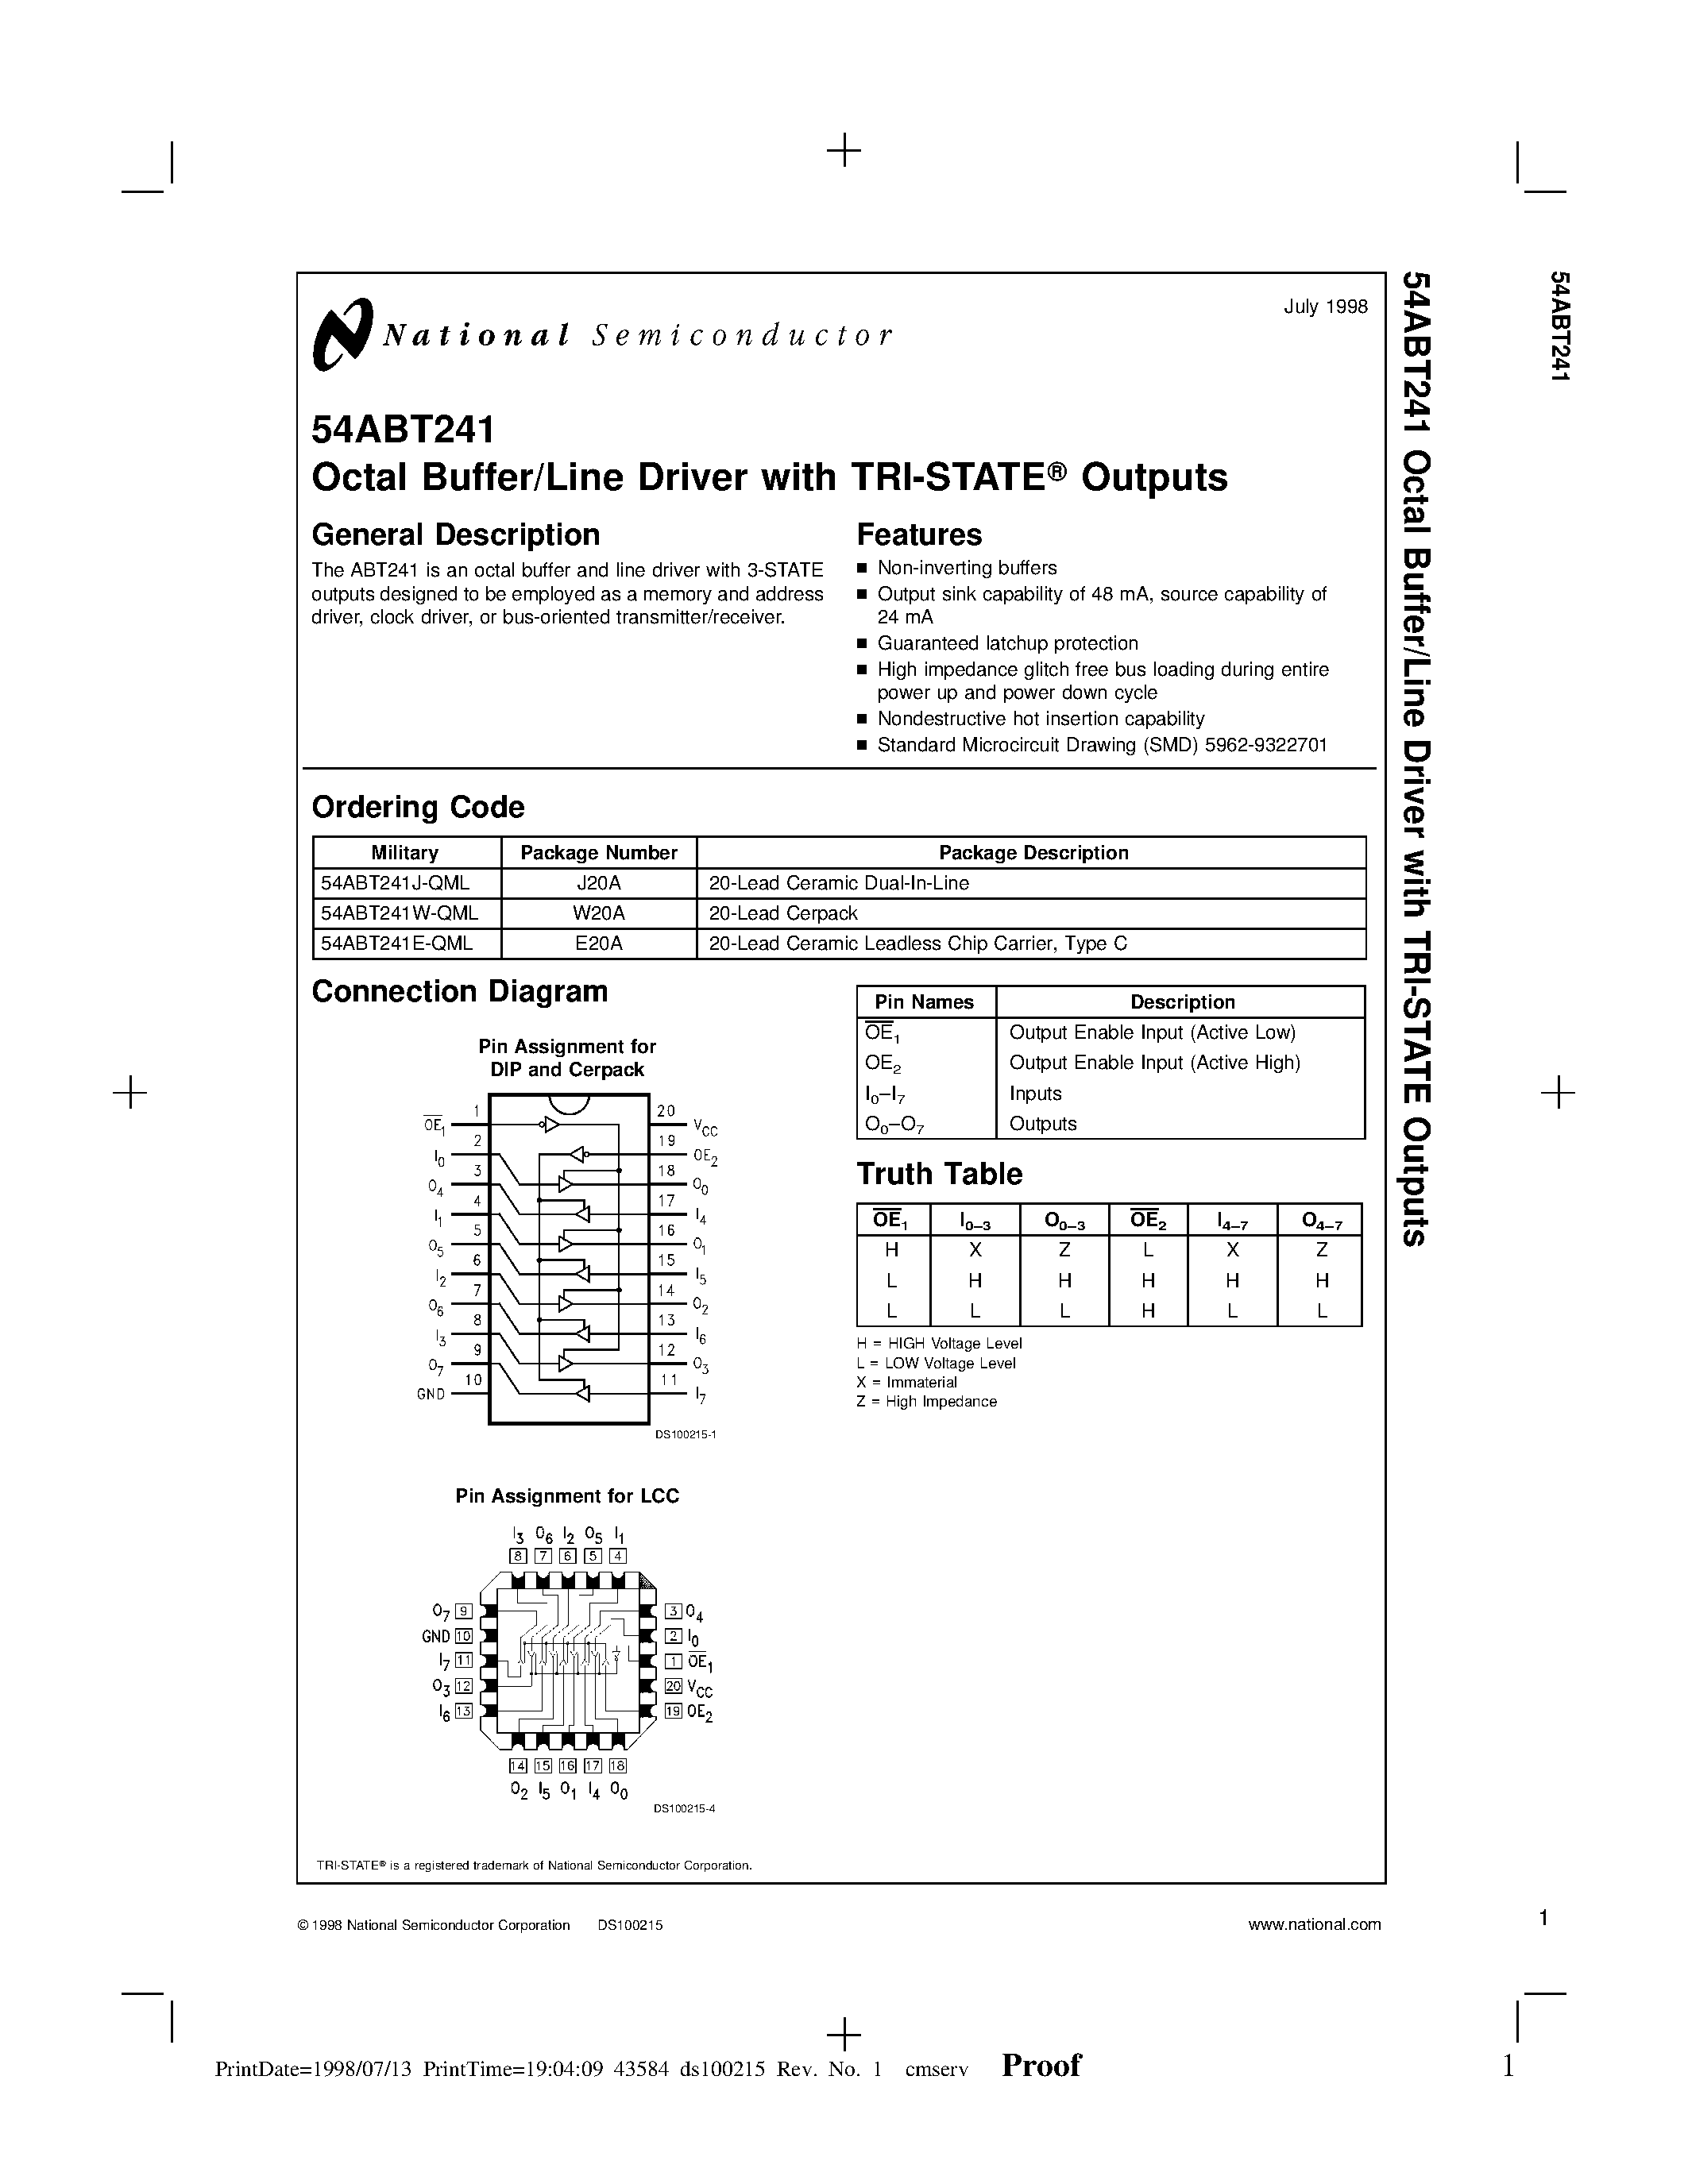 Datasheet 54ABT241J-QML - Octal Buffer/Line Driver with TRI-STATE Outputs page 1